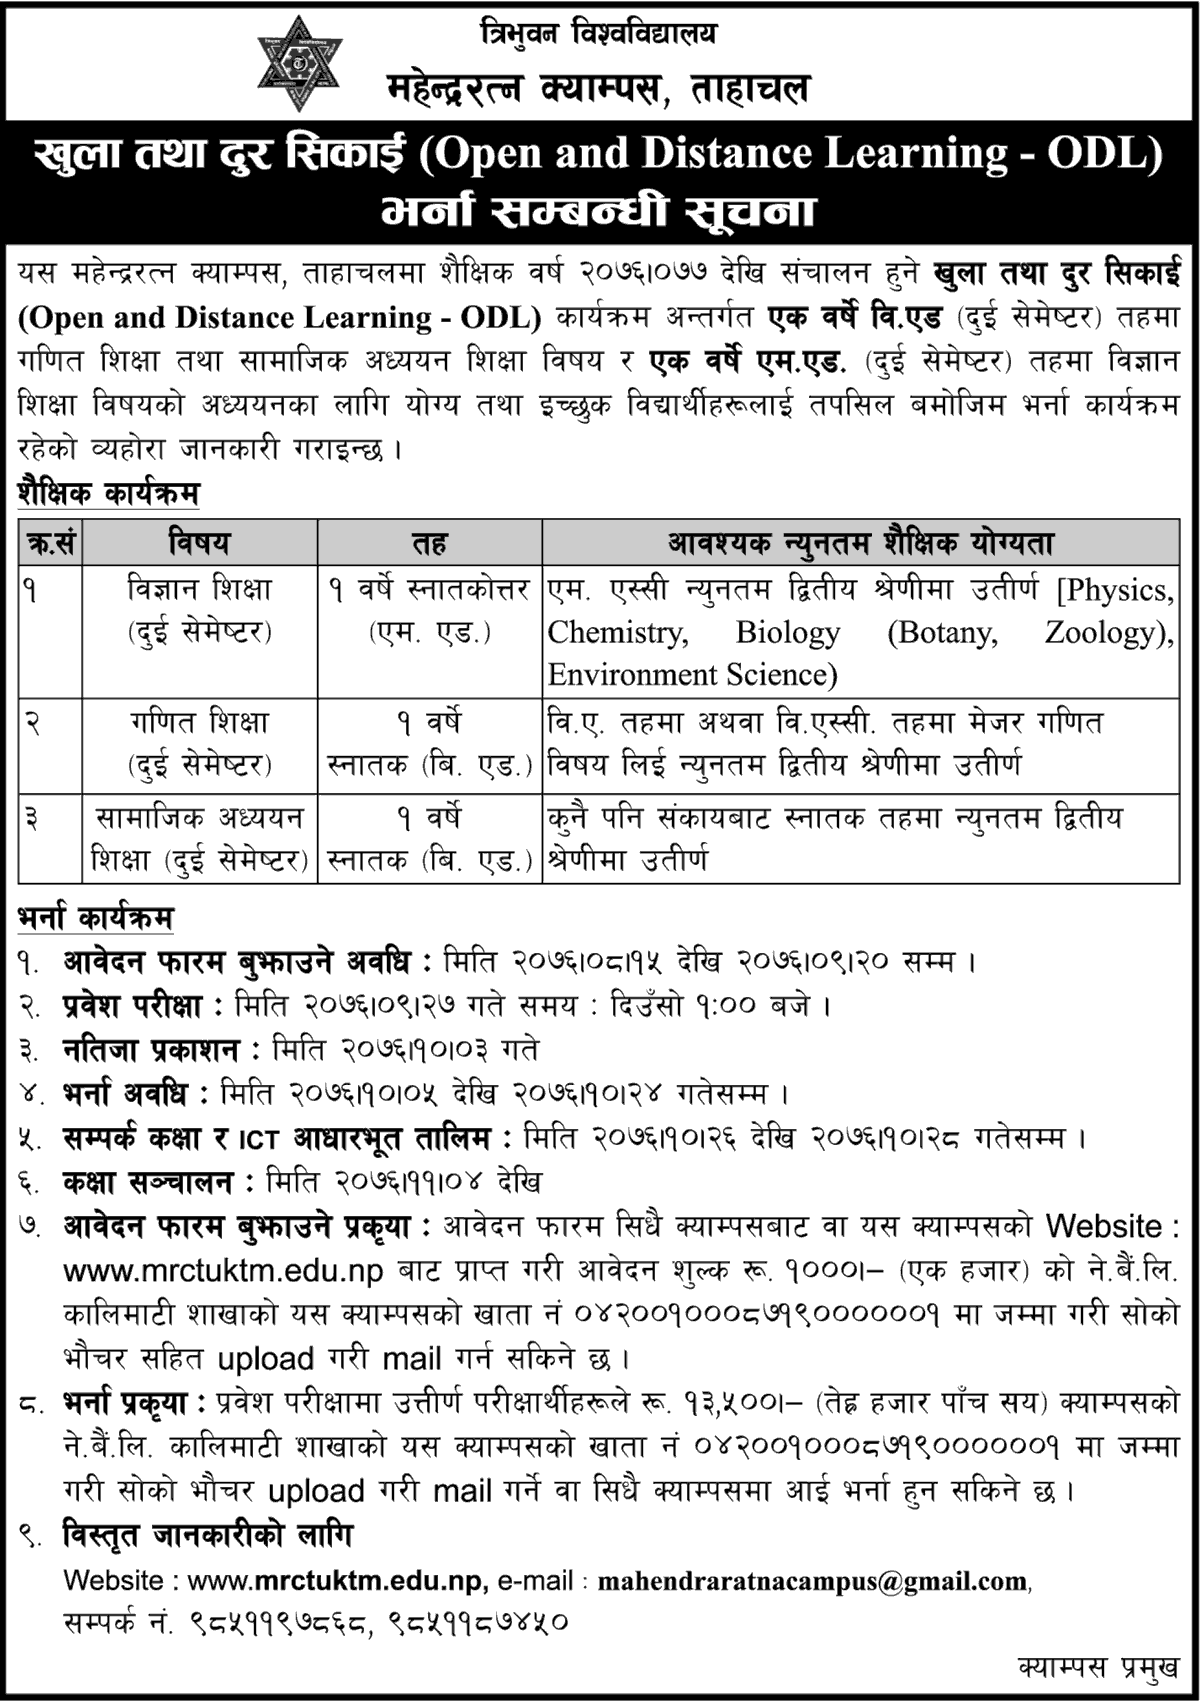 One Year B.Ed. and M.Ed. (Open and Distance Learning) Admission Notice